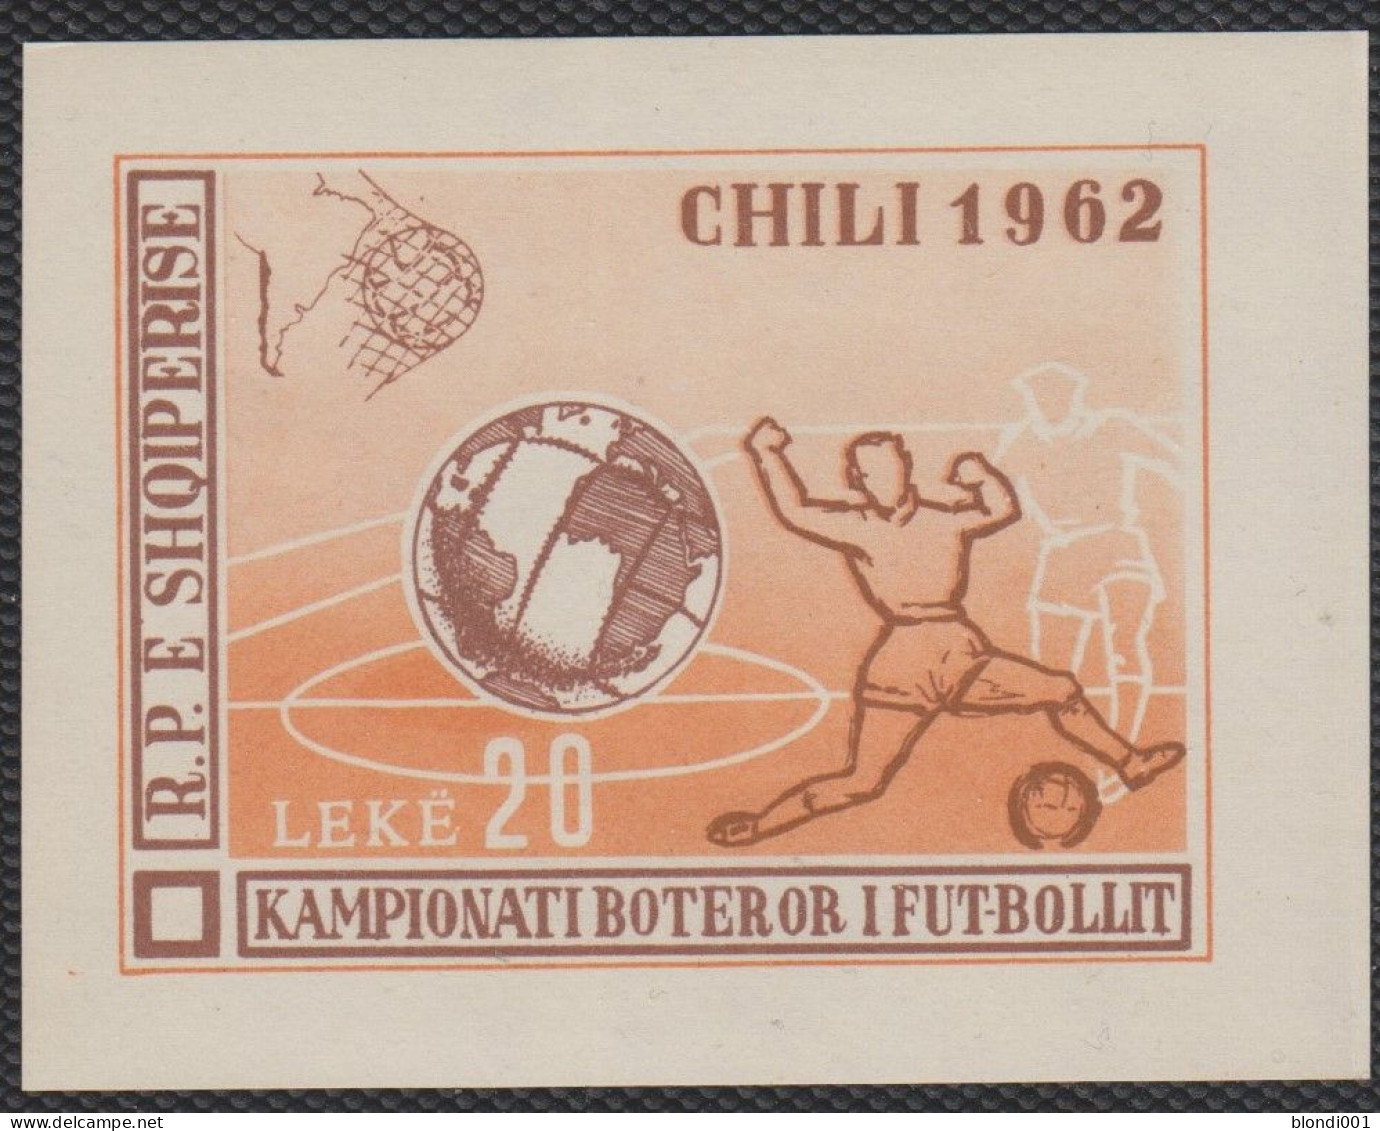 Soccer World Cup 1962 - Football - ALBANIA - S/S Imperf. MNH - 1962 – Cile